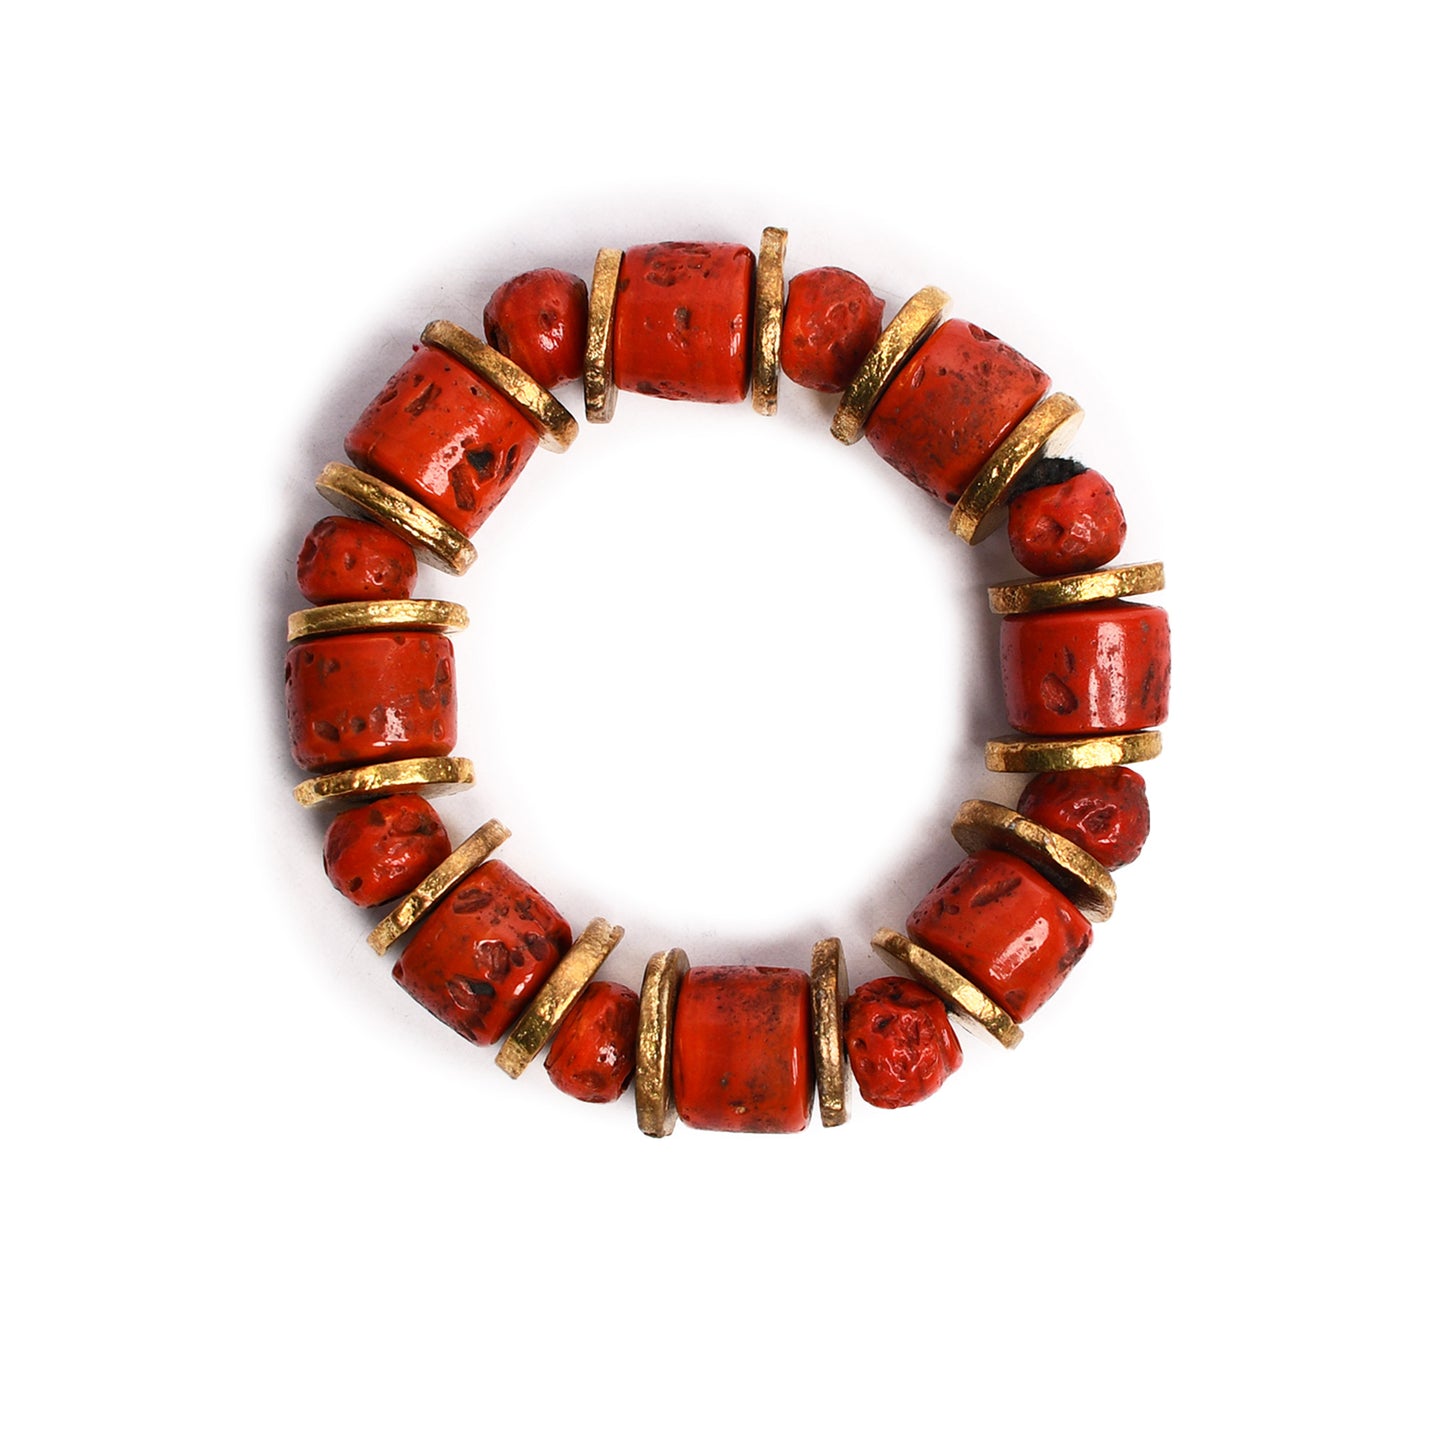 Red & Golden Beaded Stretchable Bracelet by Bamboo Tree Jewels